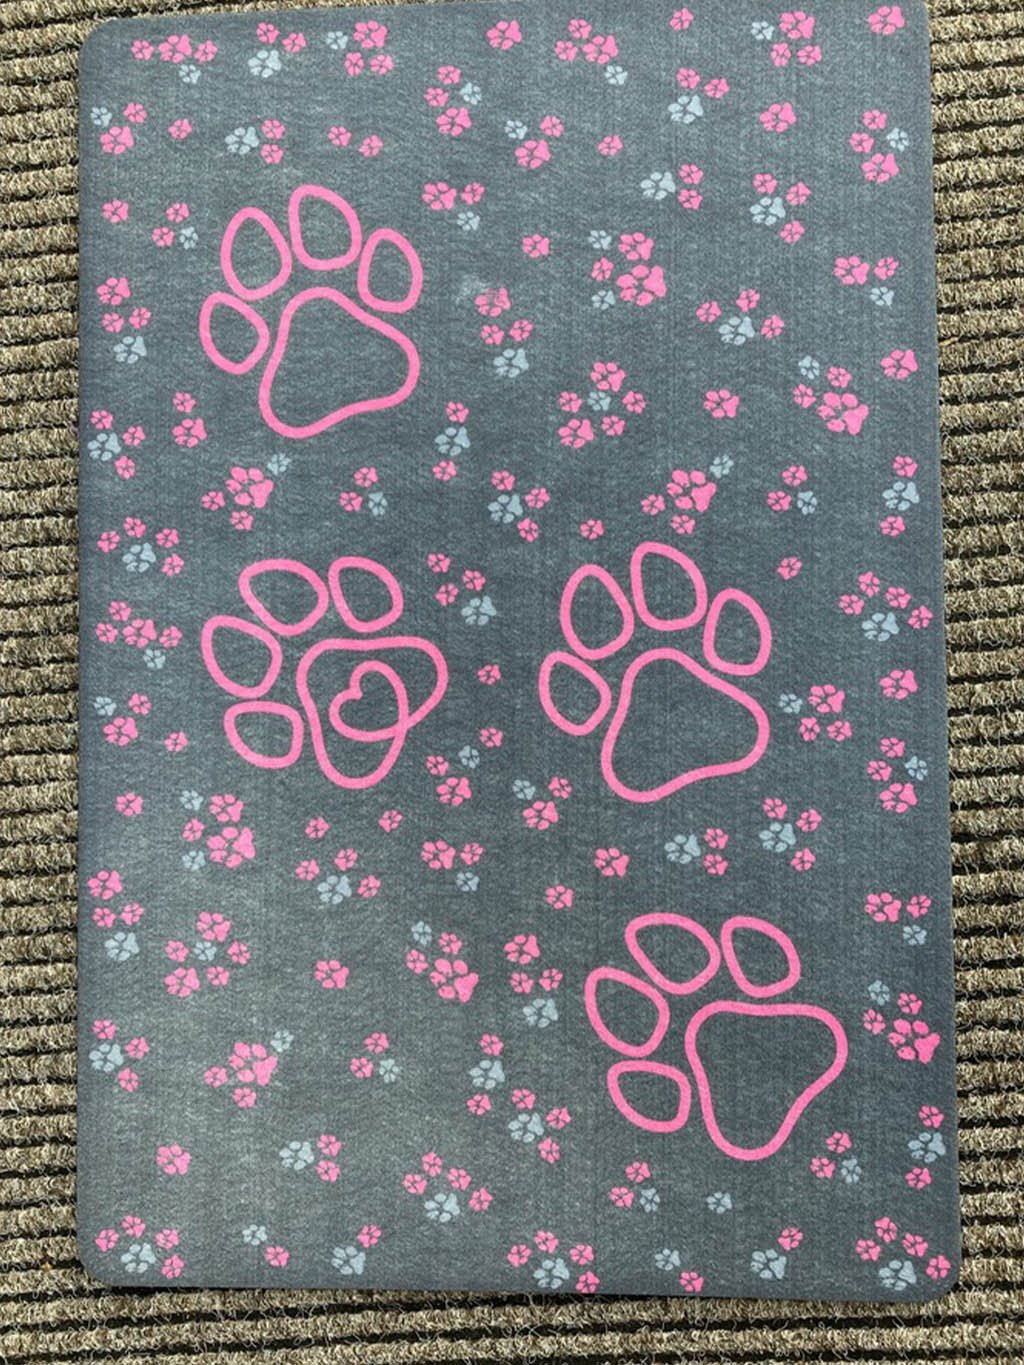 Doormat with pink paws